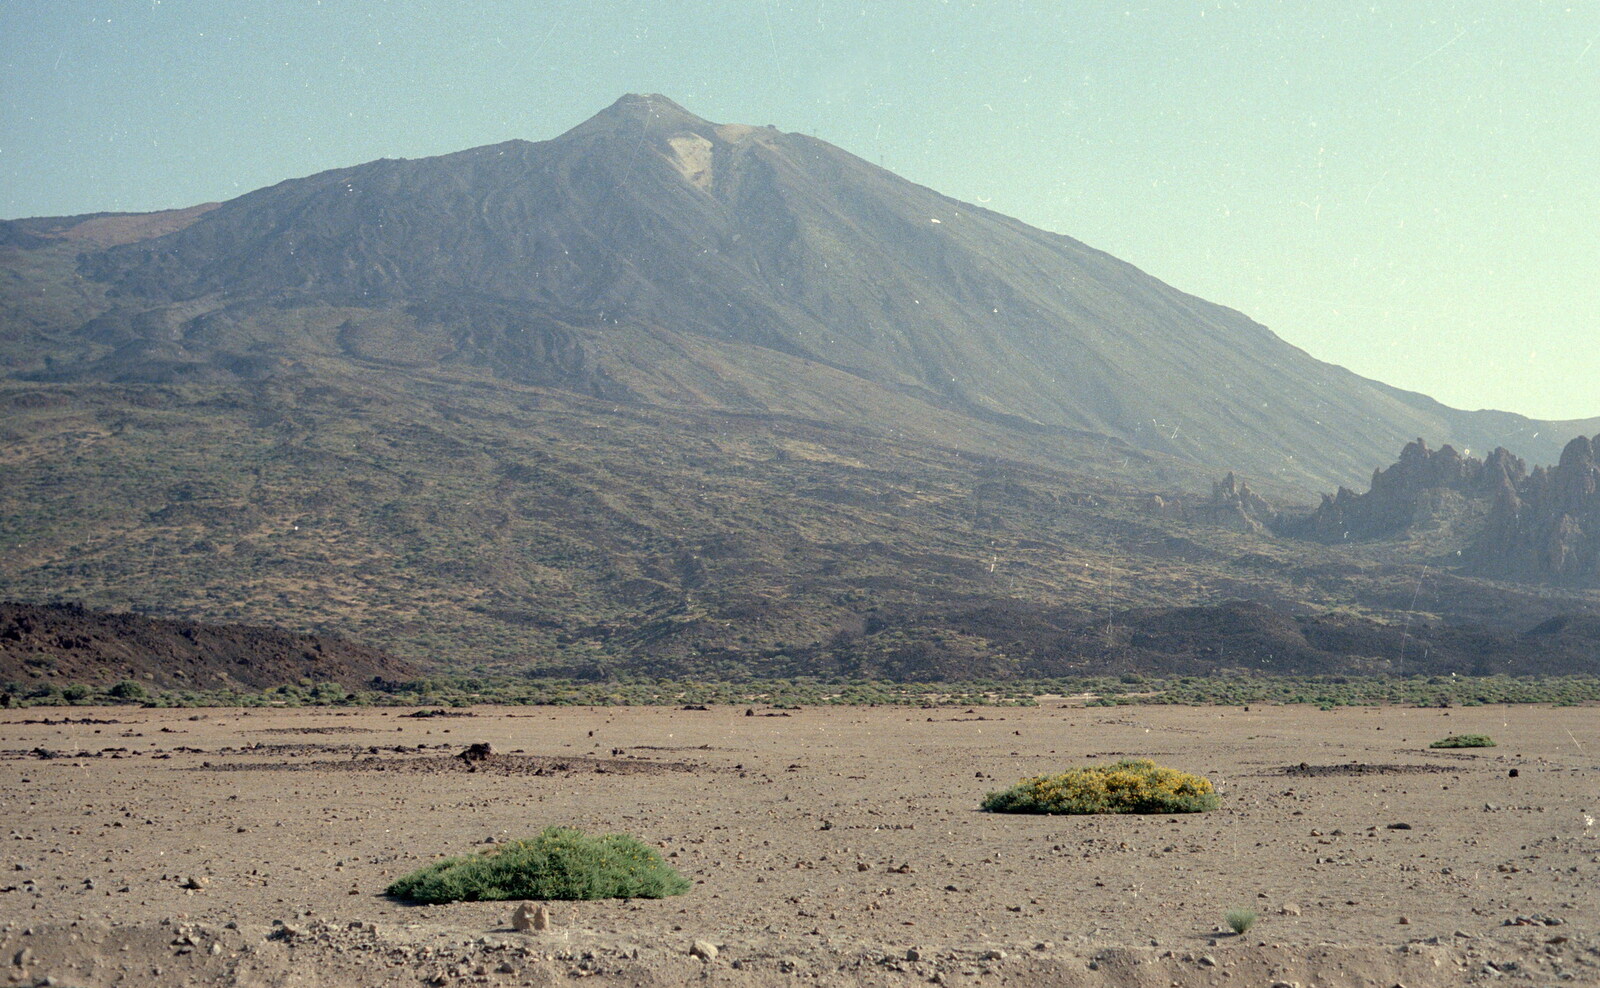 Pico del Teide from A Holiday in Los Christianos, Tenerife - 19th June 1985